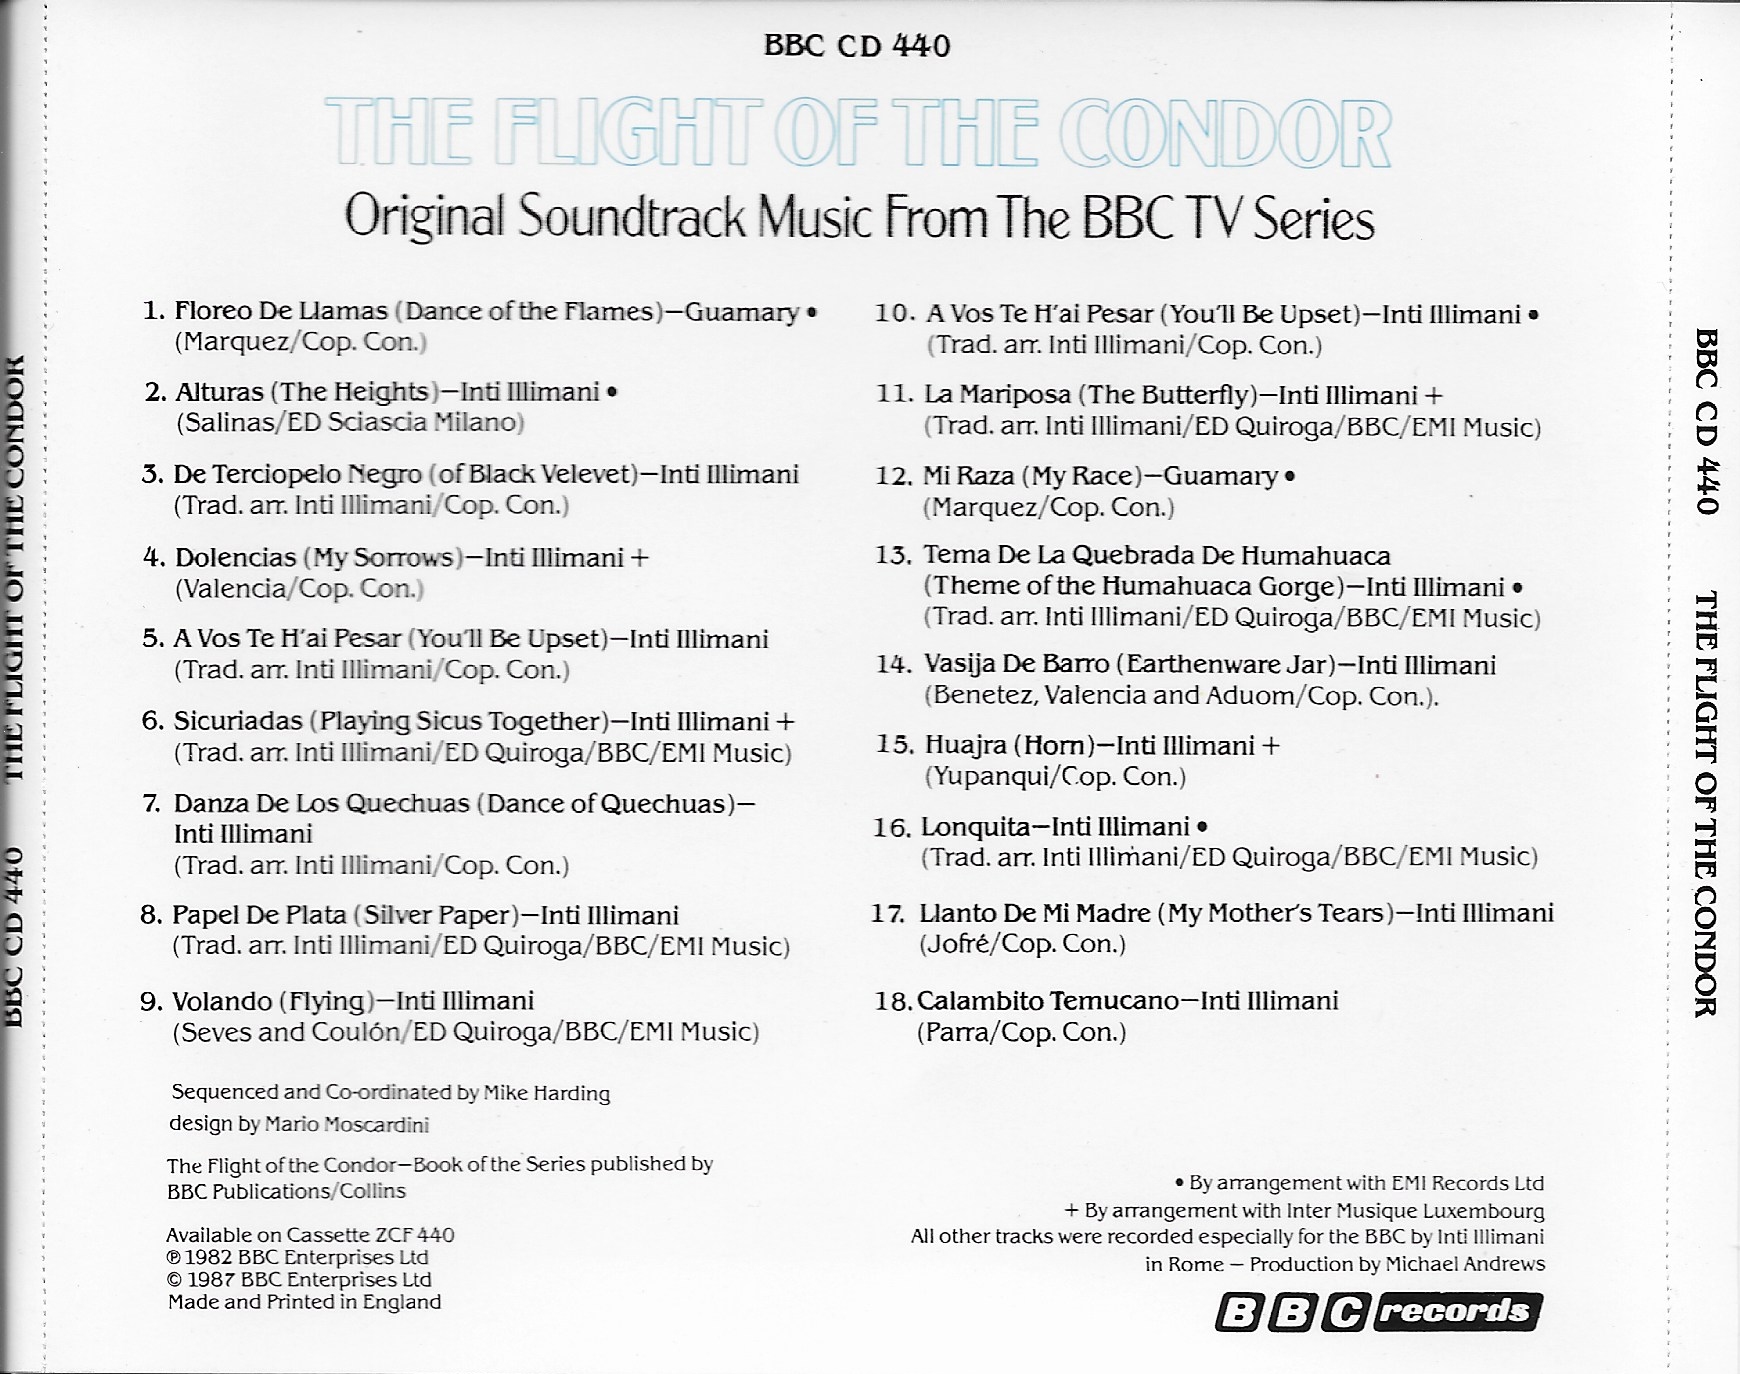 Back cover of BBCCD440